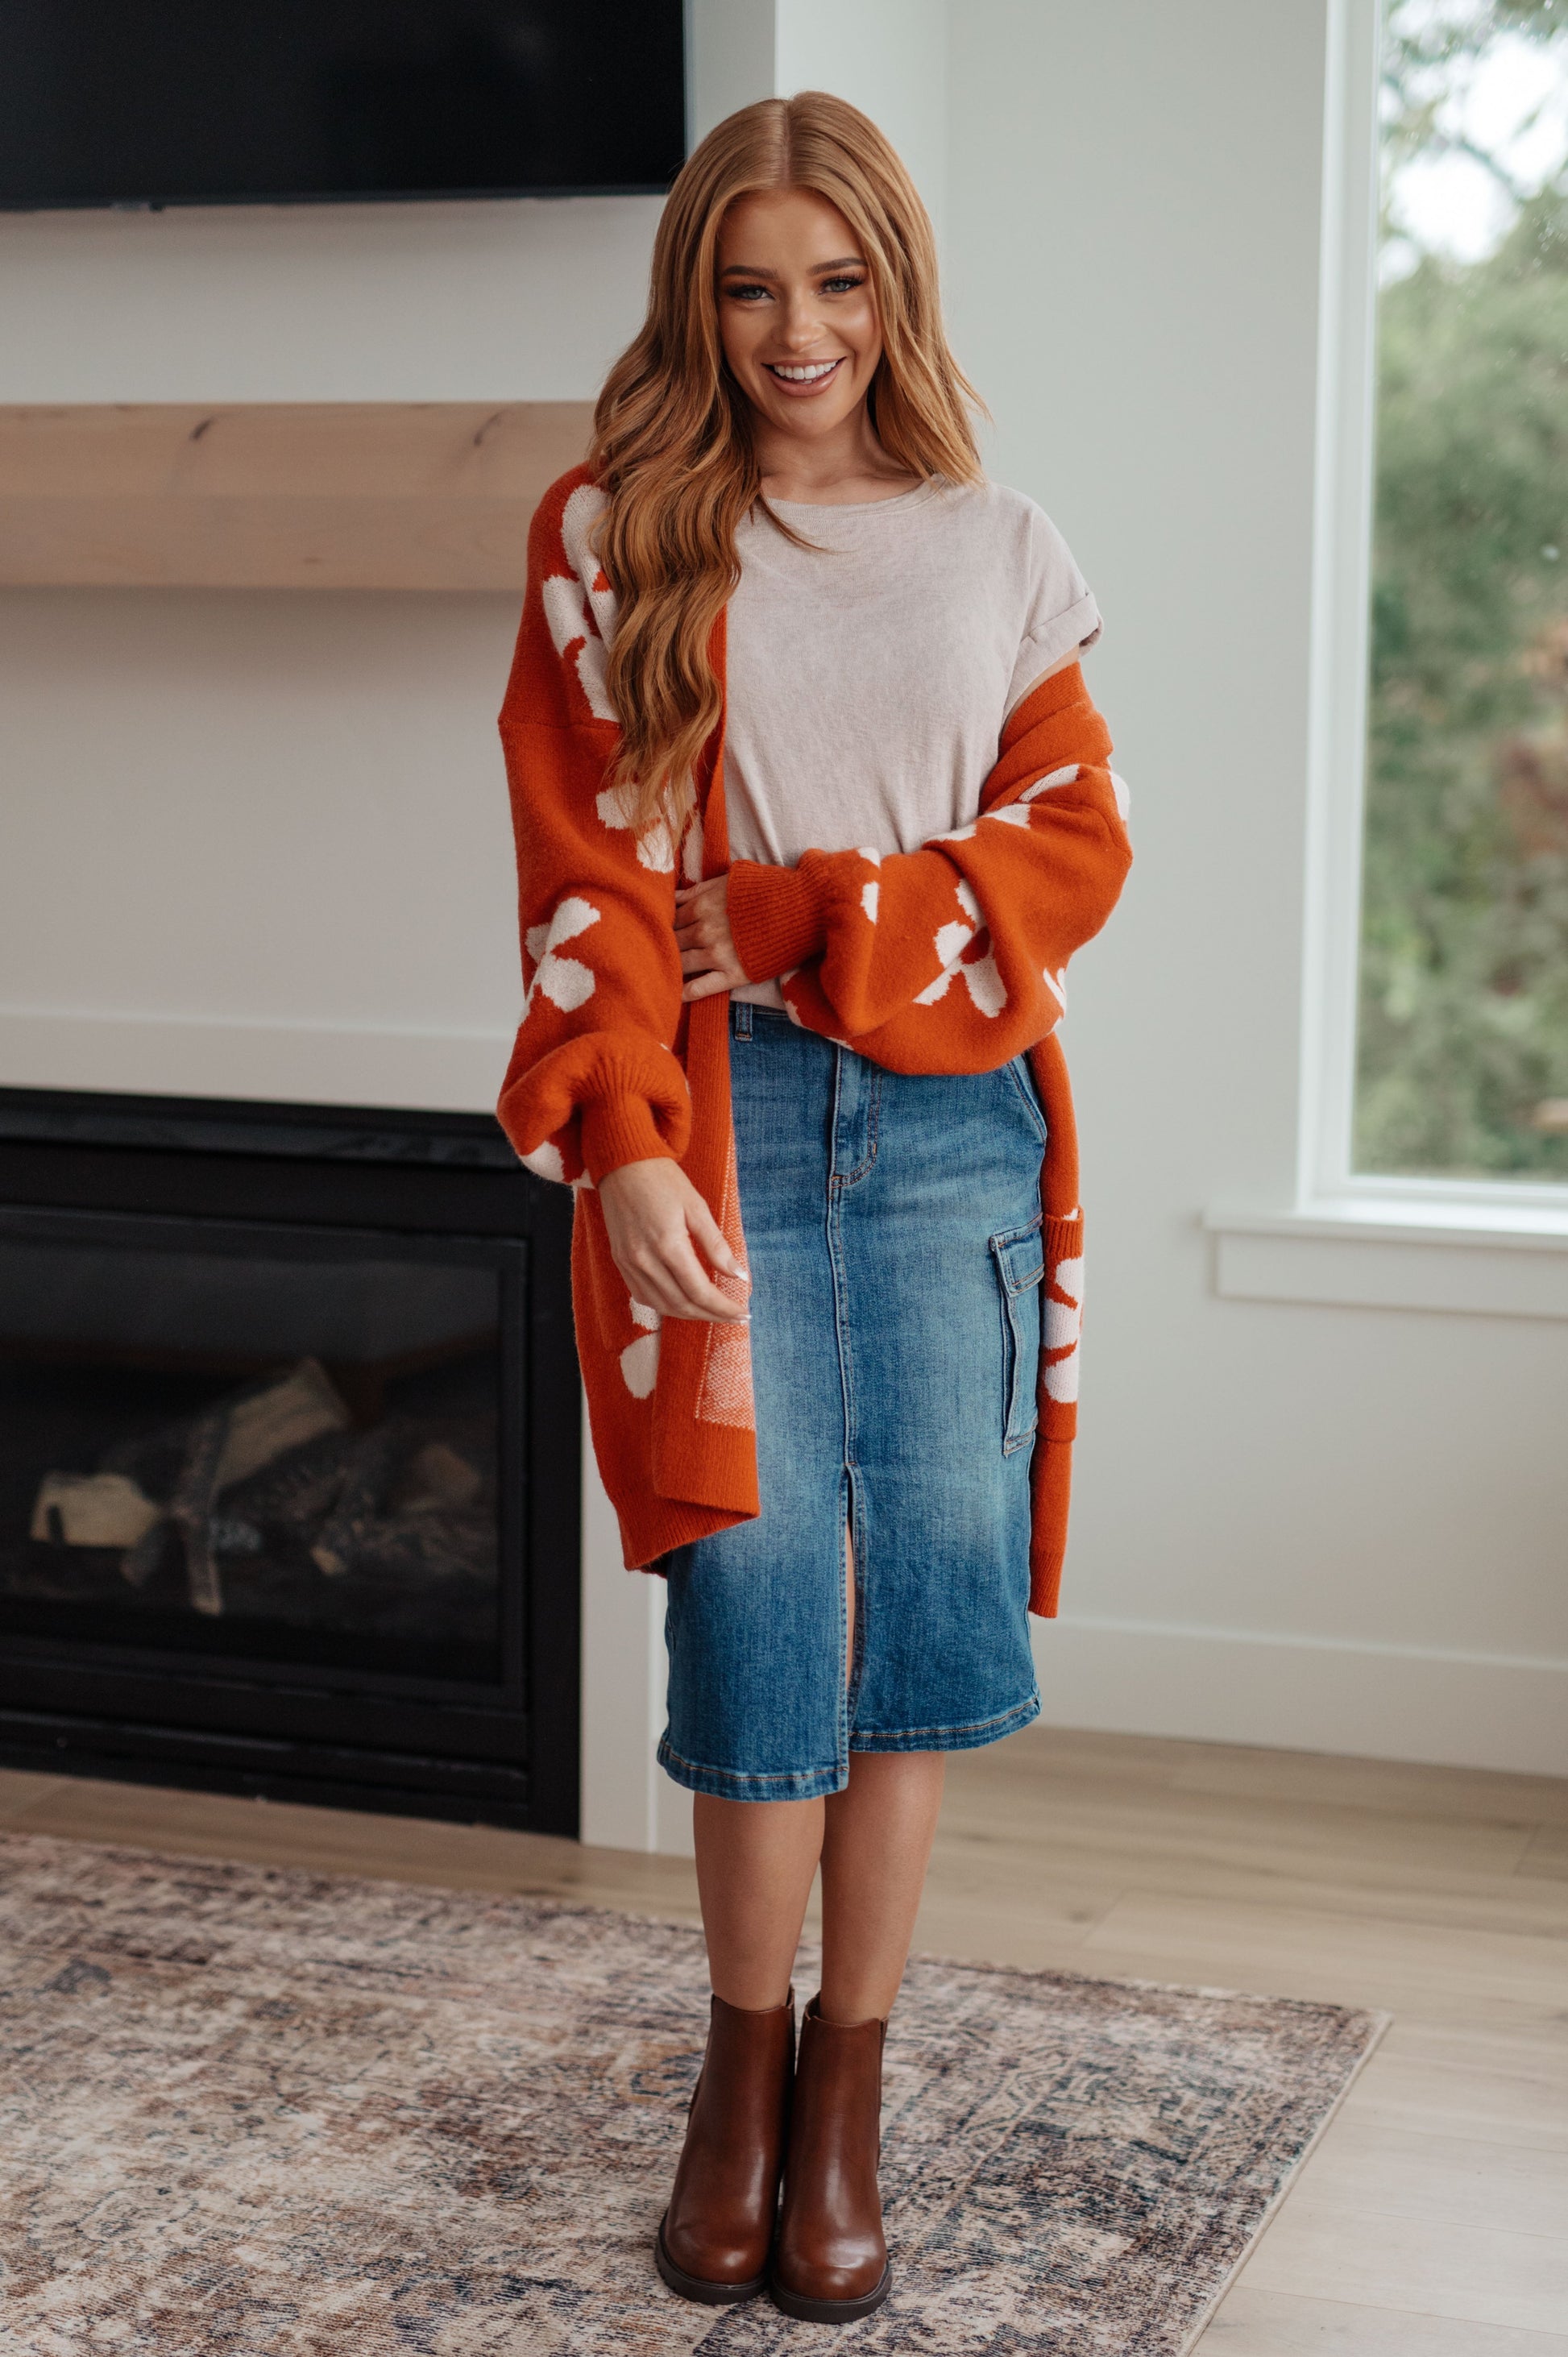 Enough Anyways Floral Cardigan in Burnt Orange - Three Bears Boutique